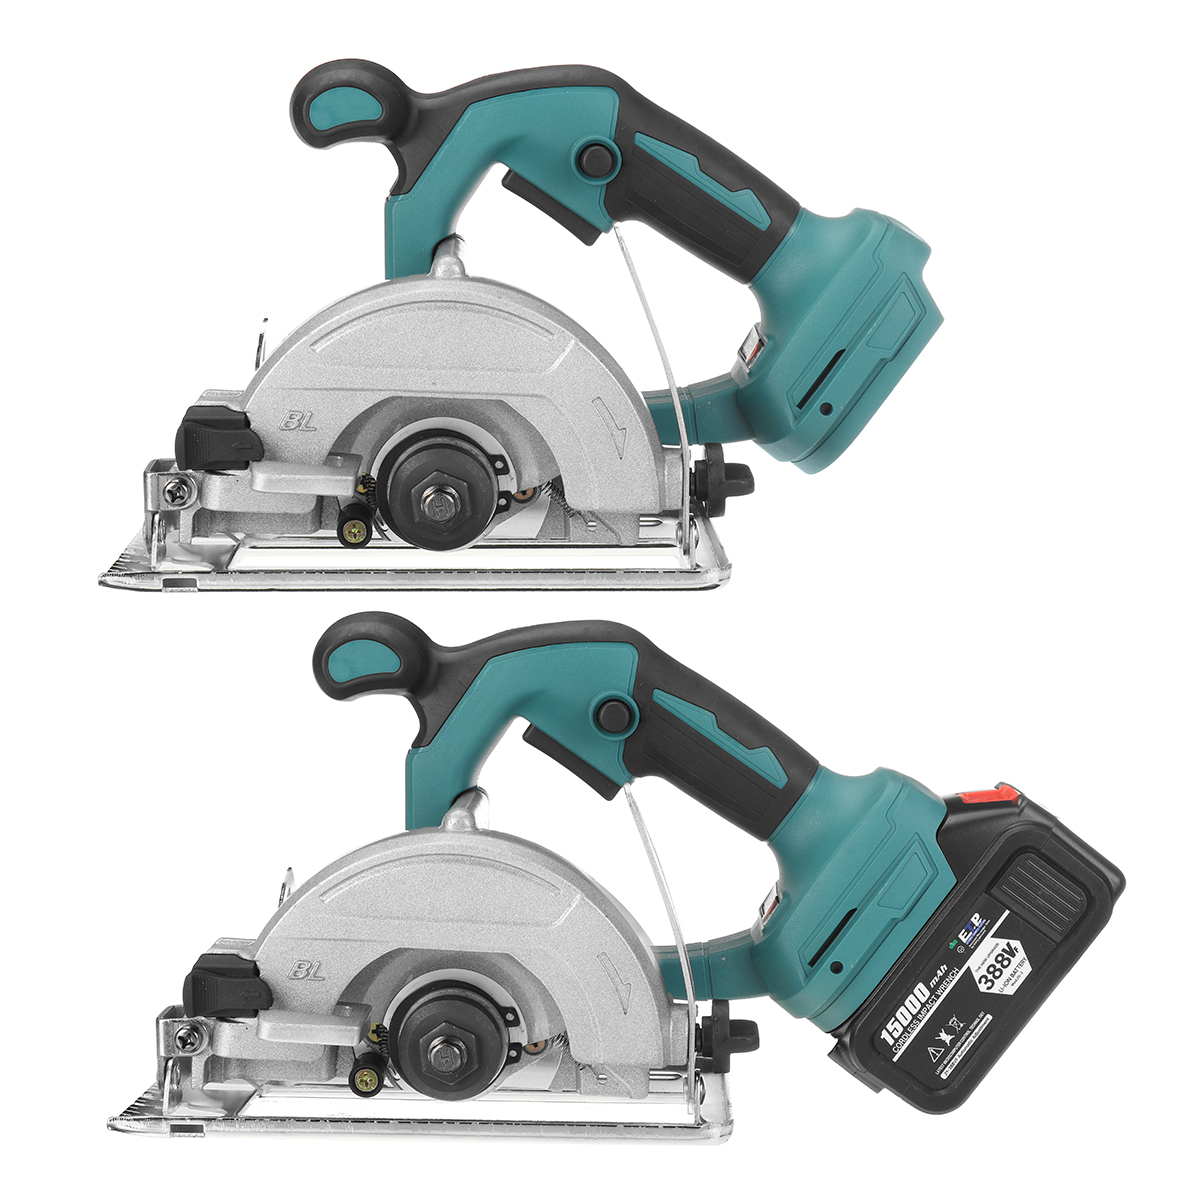 388VF-Electric-Circular-Saw-Woodworking-Wood-Wood-Cutter-W-None12-Battery-For-Makita-1859077-7